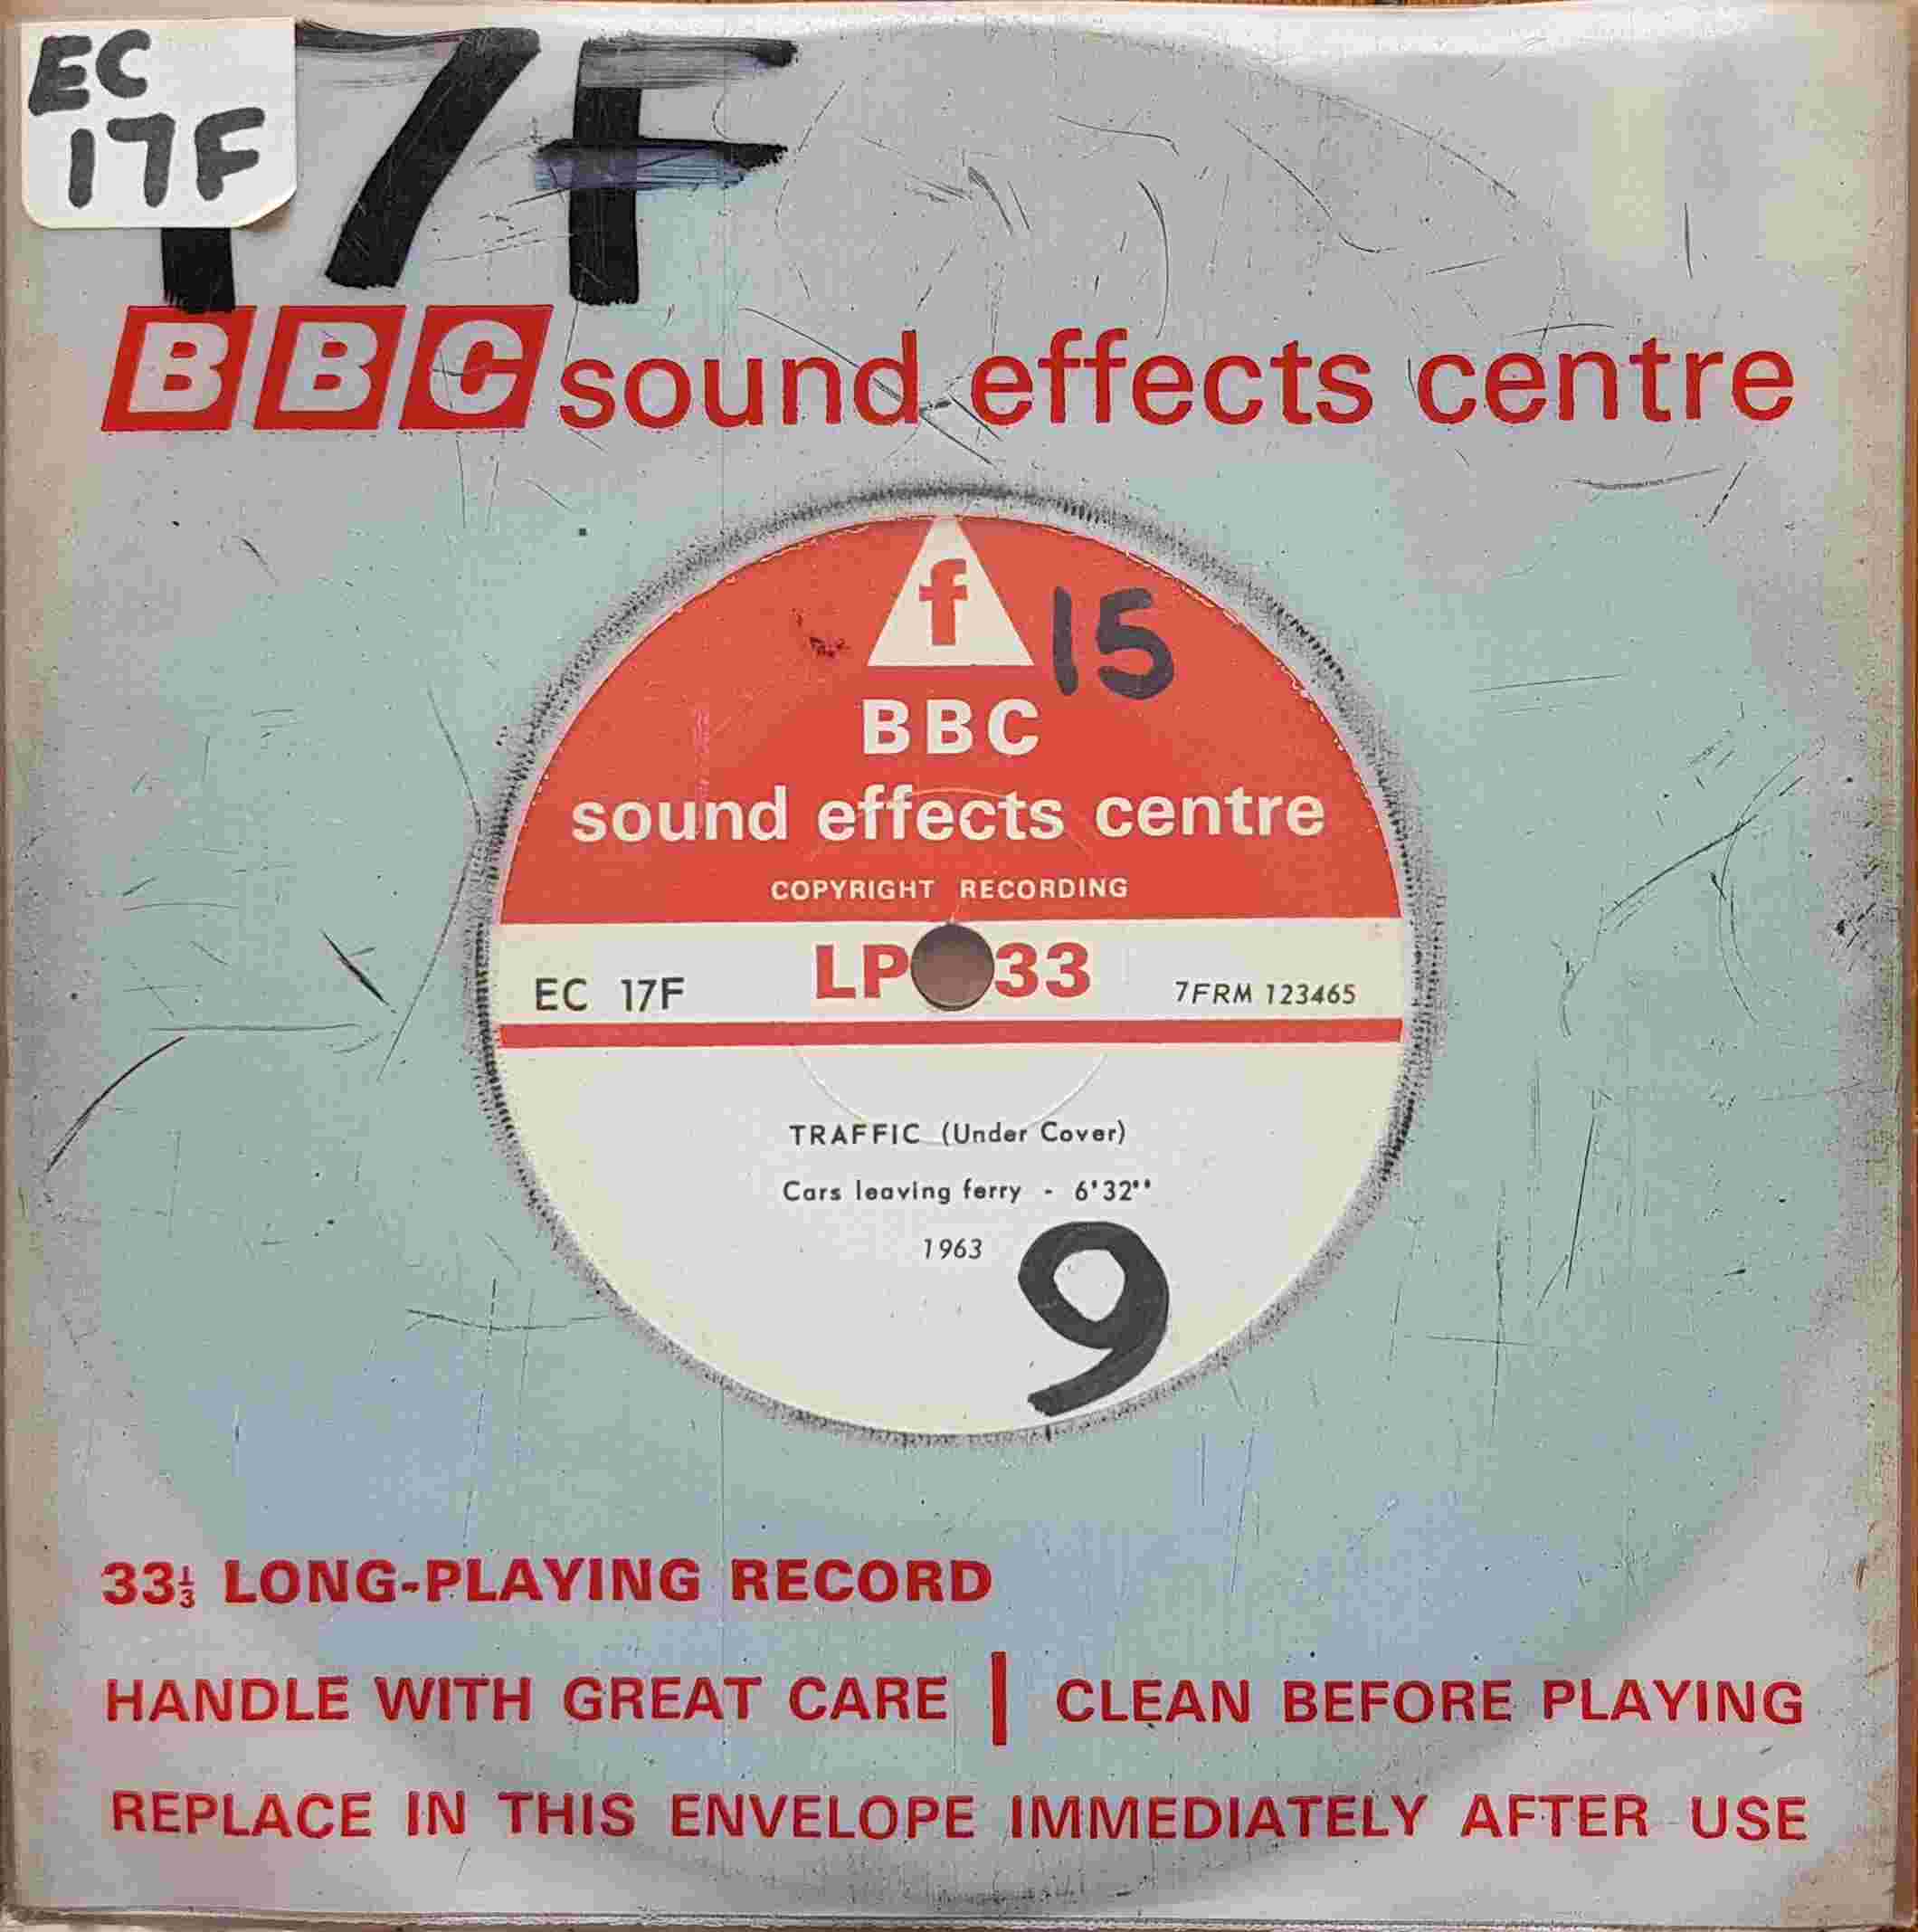 Picture of EC 17F Traffic (Under cover) / Hammersmith single by artist Not registered from the BBC records and Tapes library